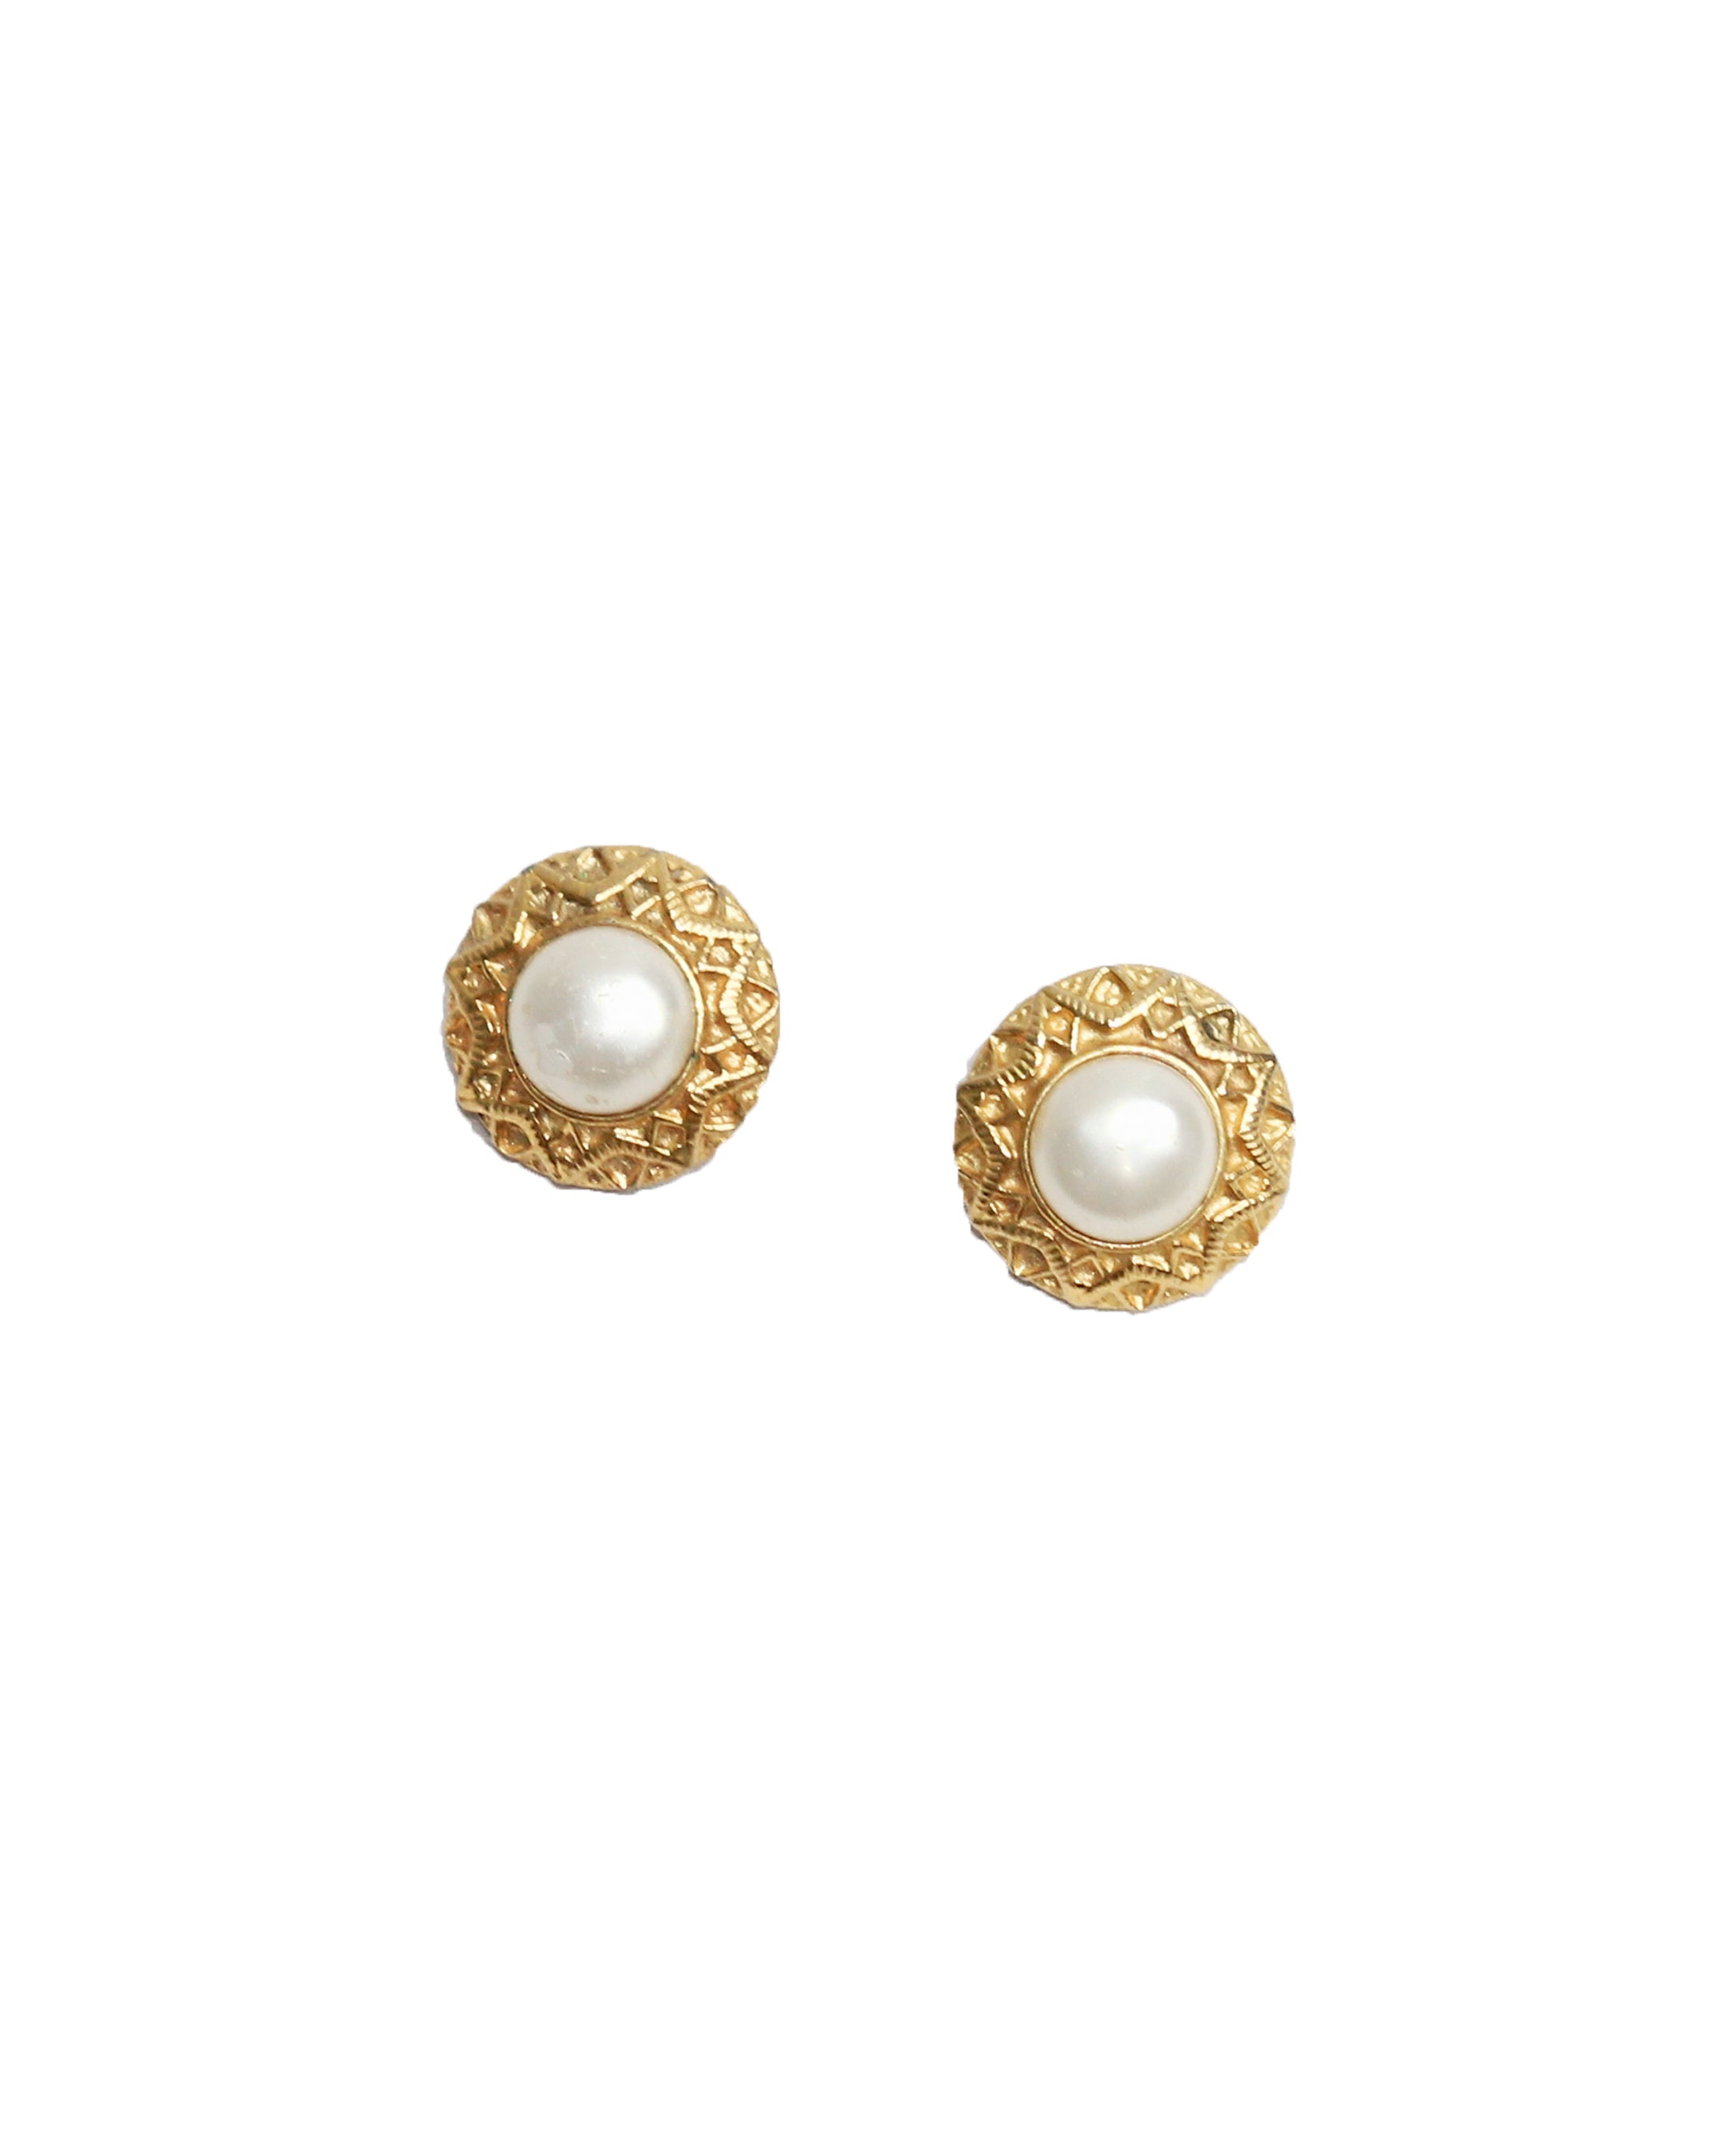 authentic chanel pearl earrings vintage